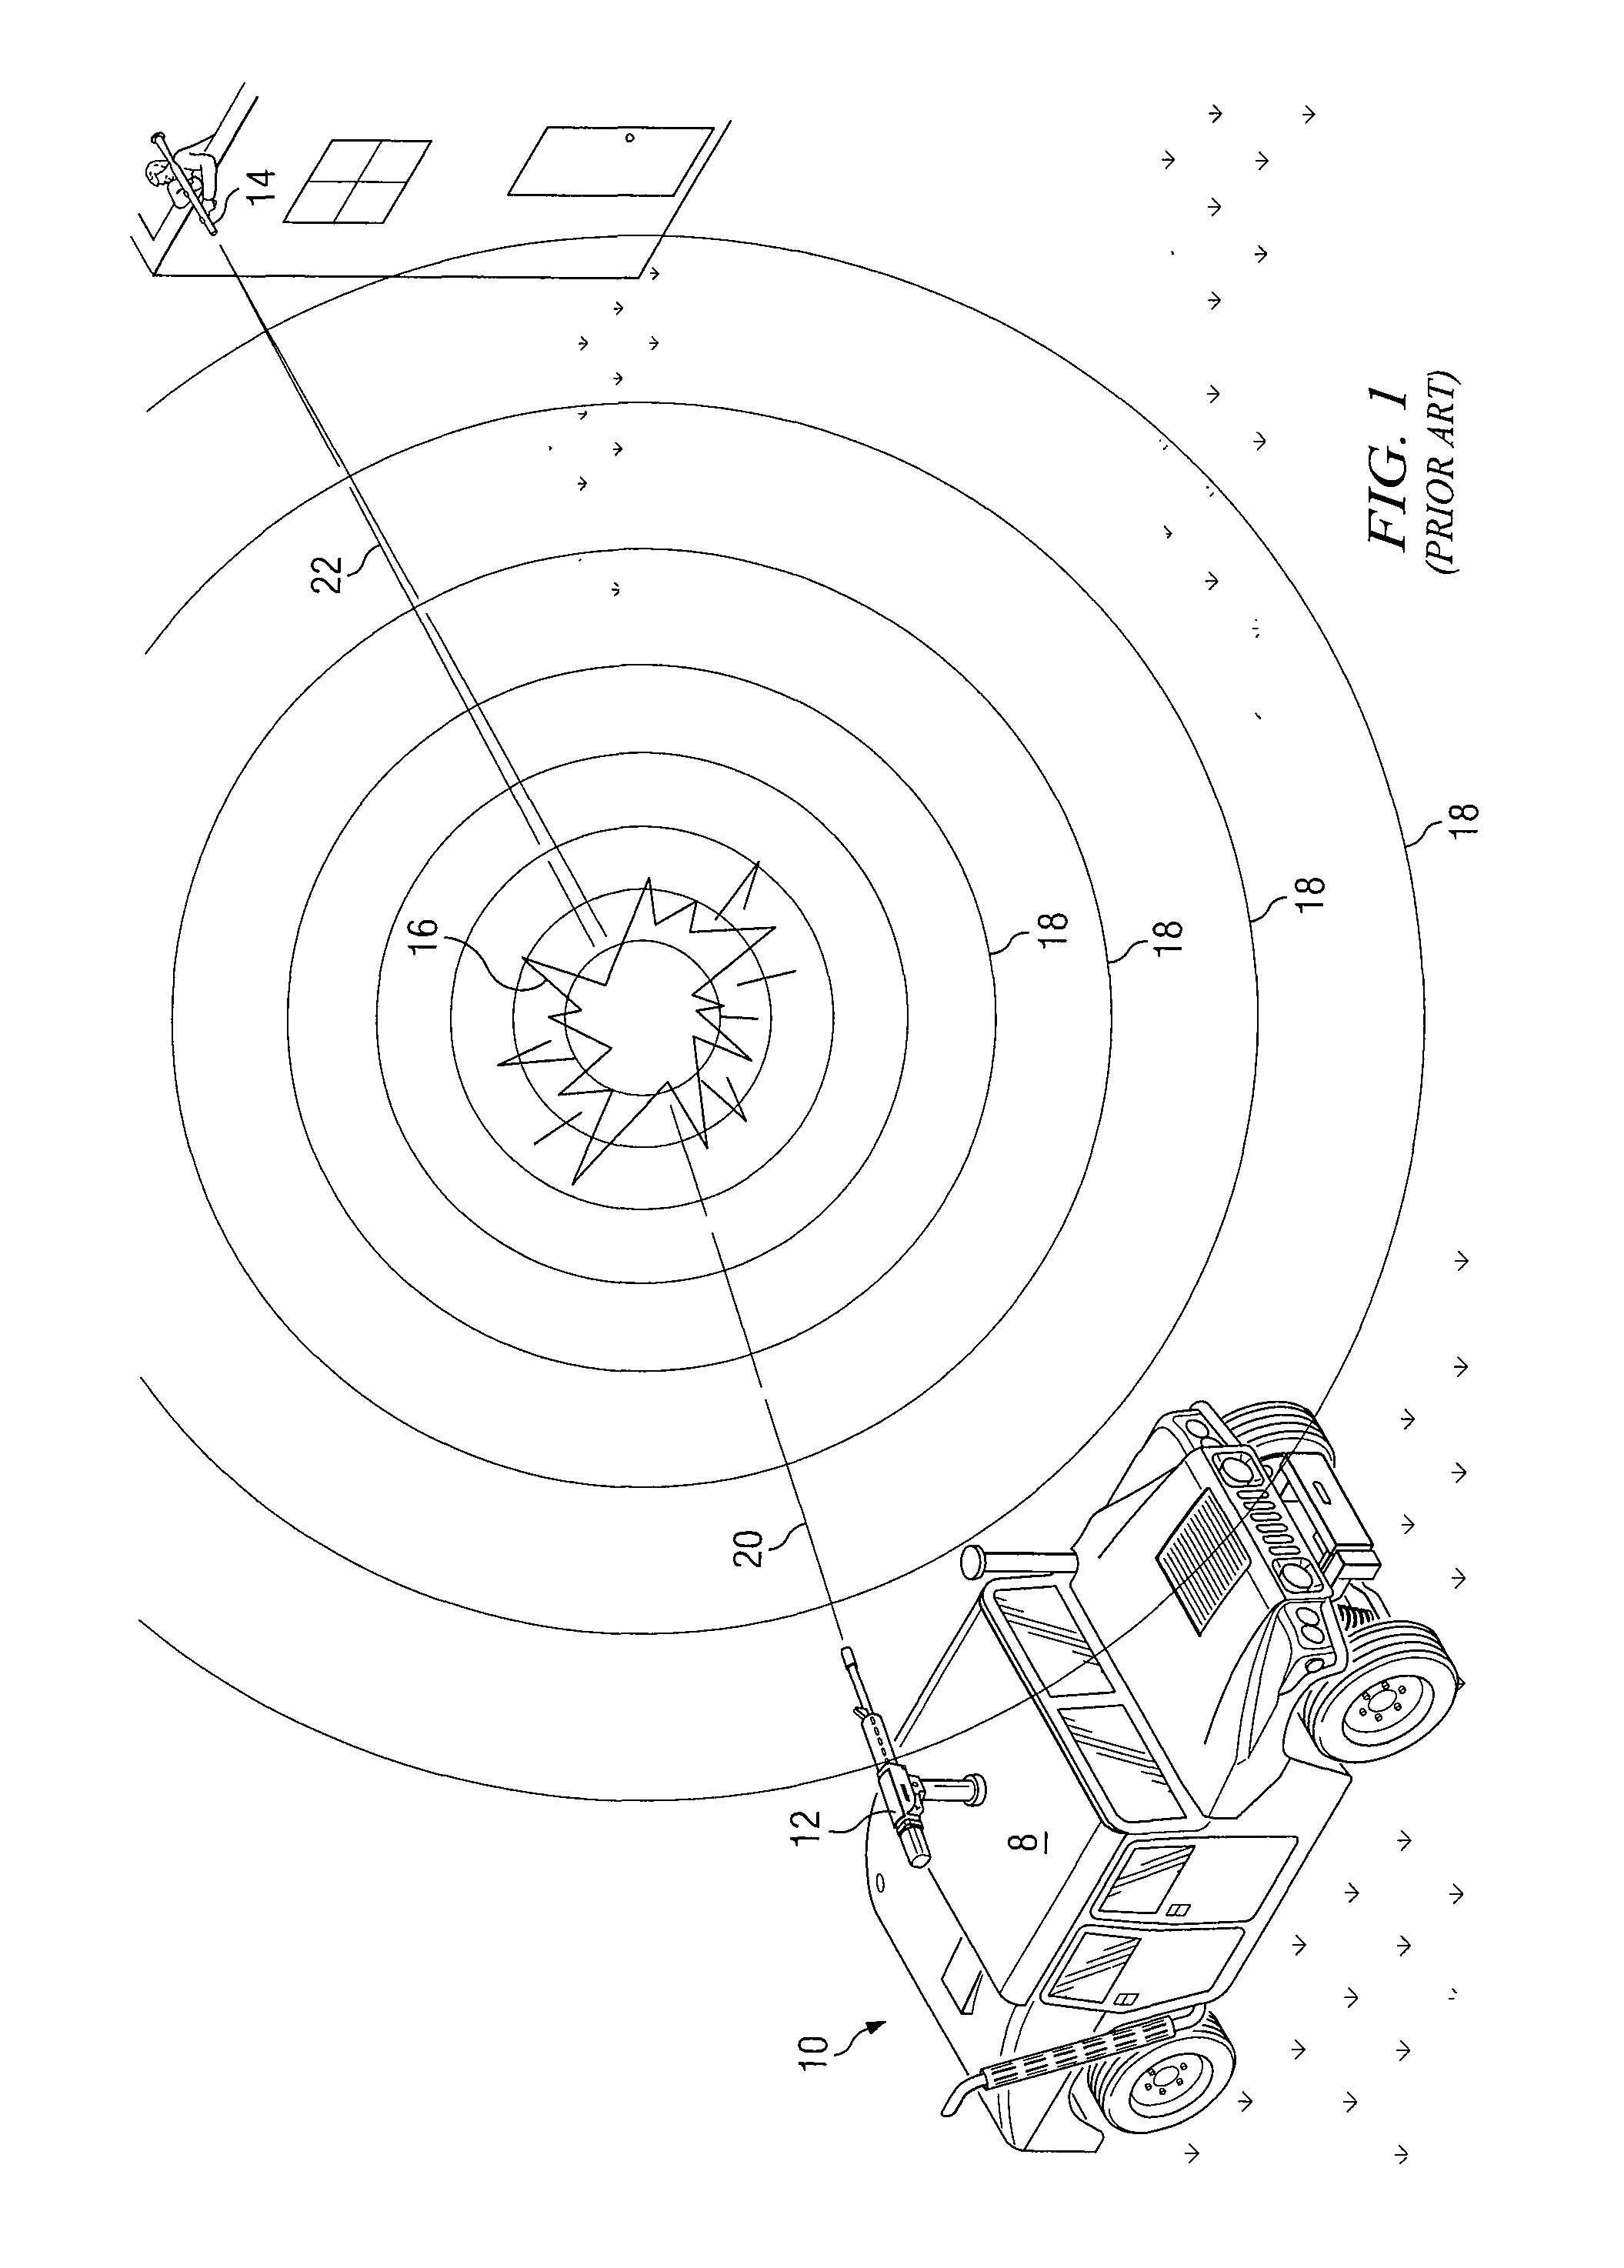 Systems and methods for mitigating a blast wave